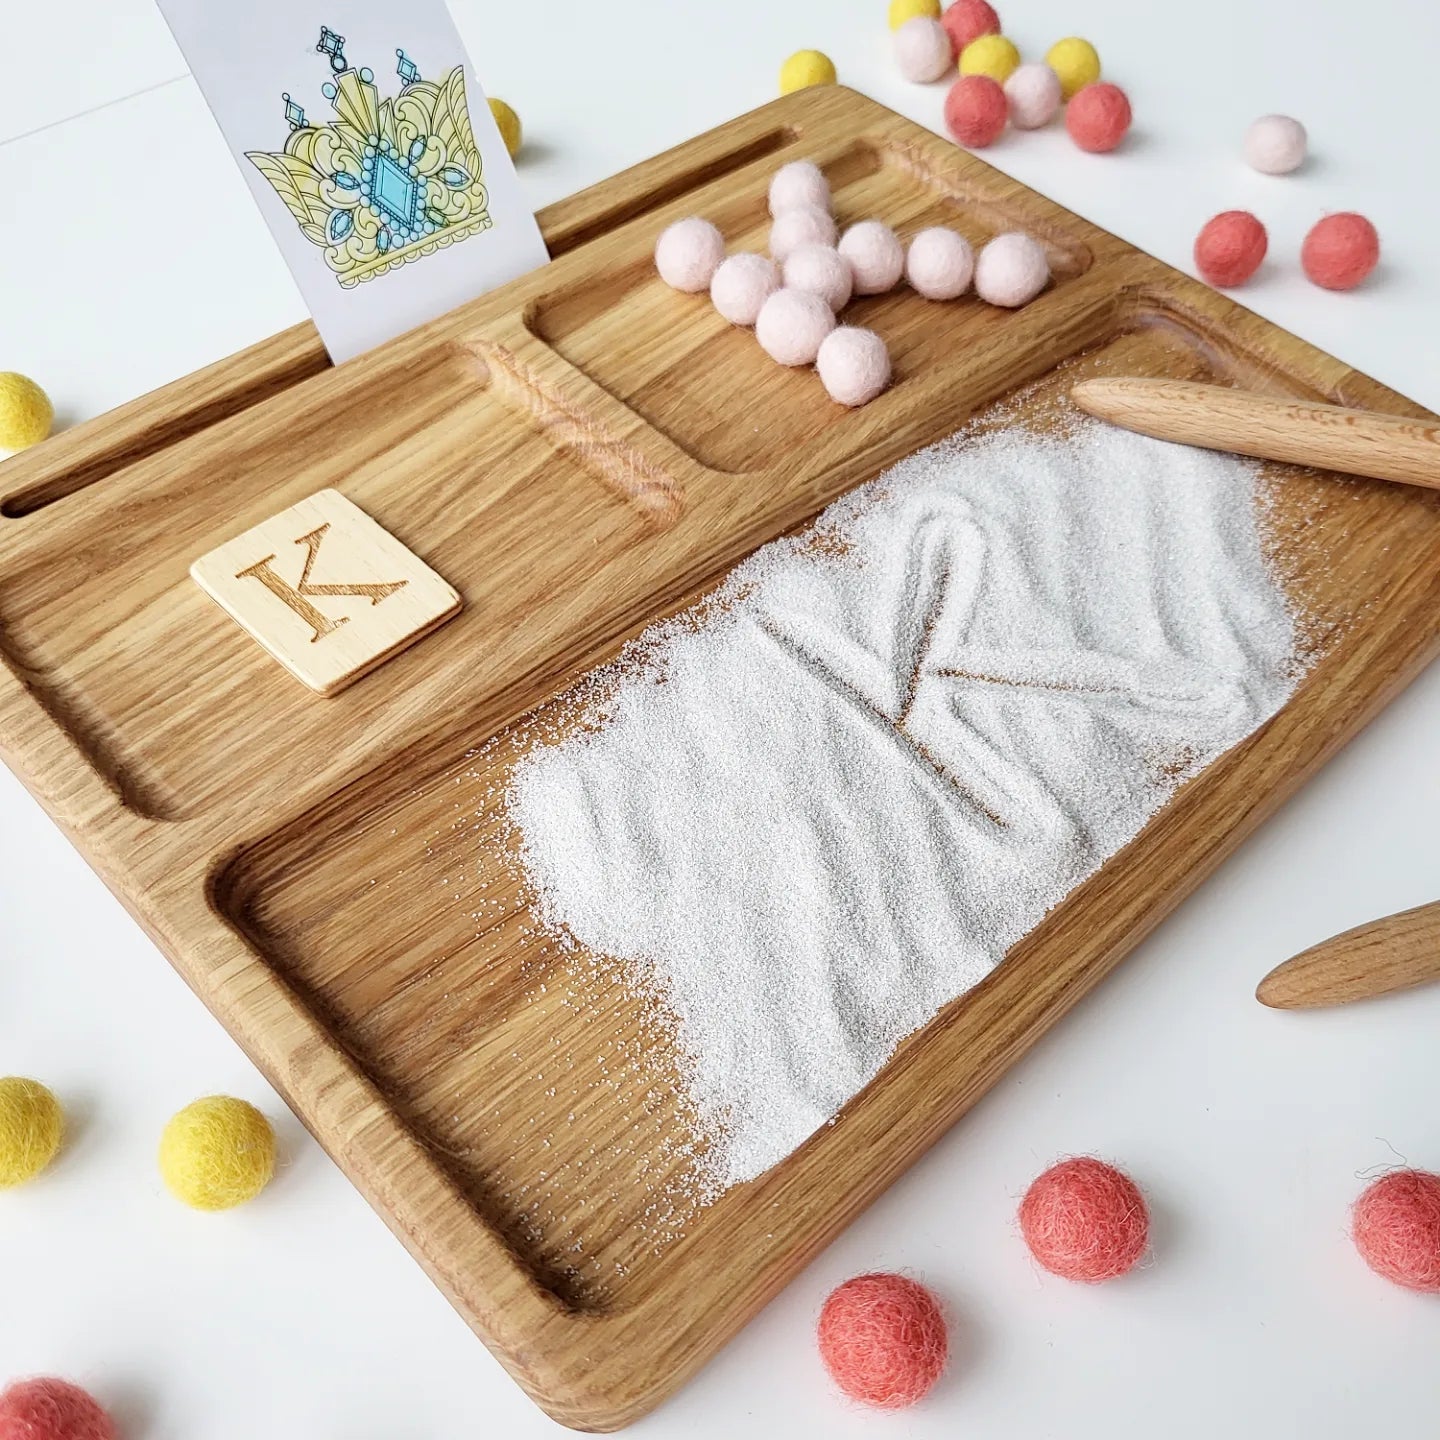 Read, write, create sand tray with letters cards, preschool, homeschool, learning letters, toddler gift, educational materials, Montessori